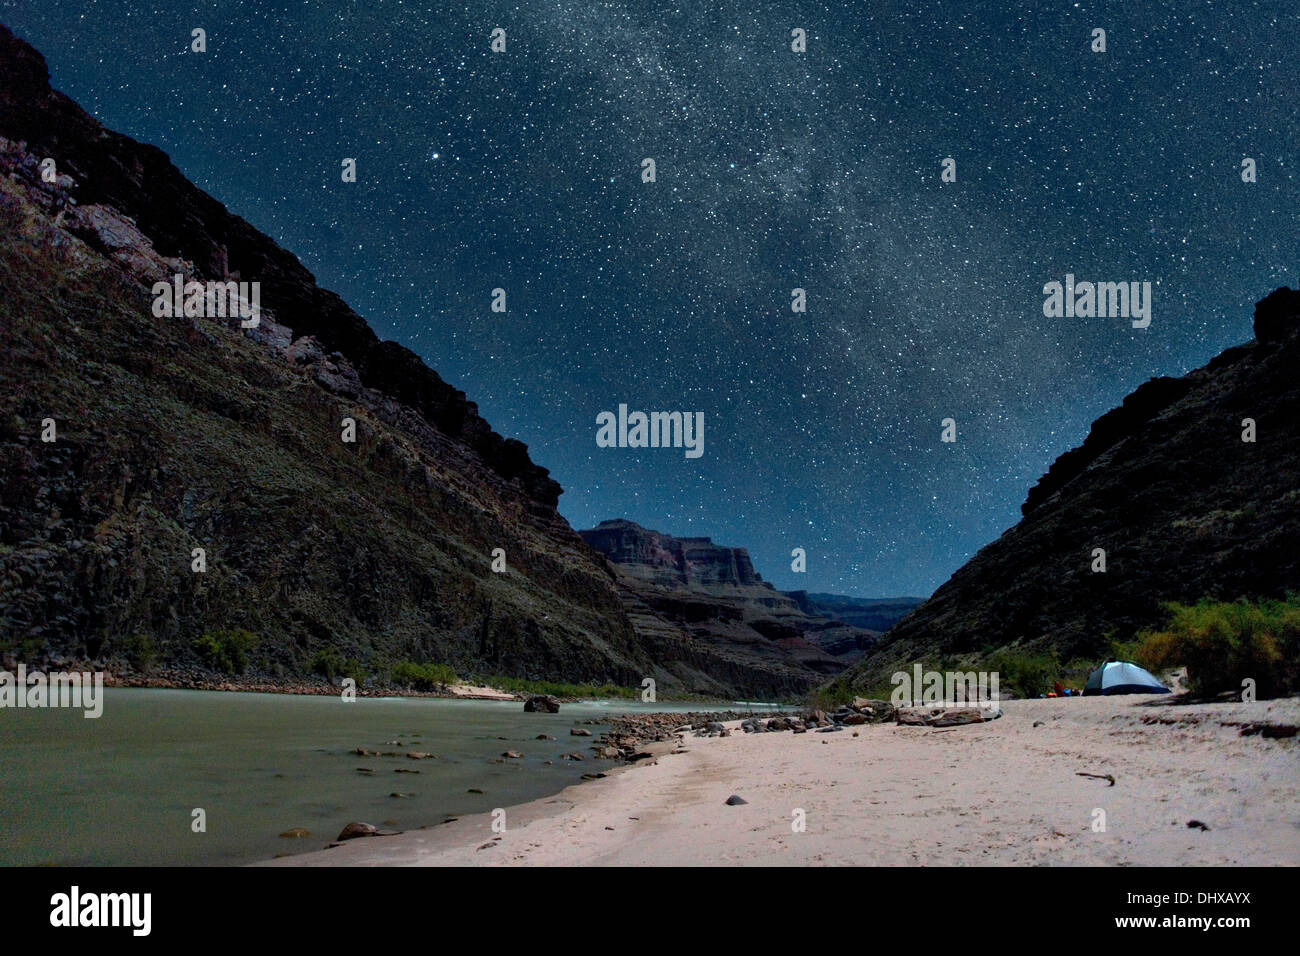 A campsite along the river under the stars at the Grand Canyon, Arizona, USA Stock Photo